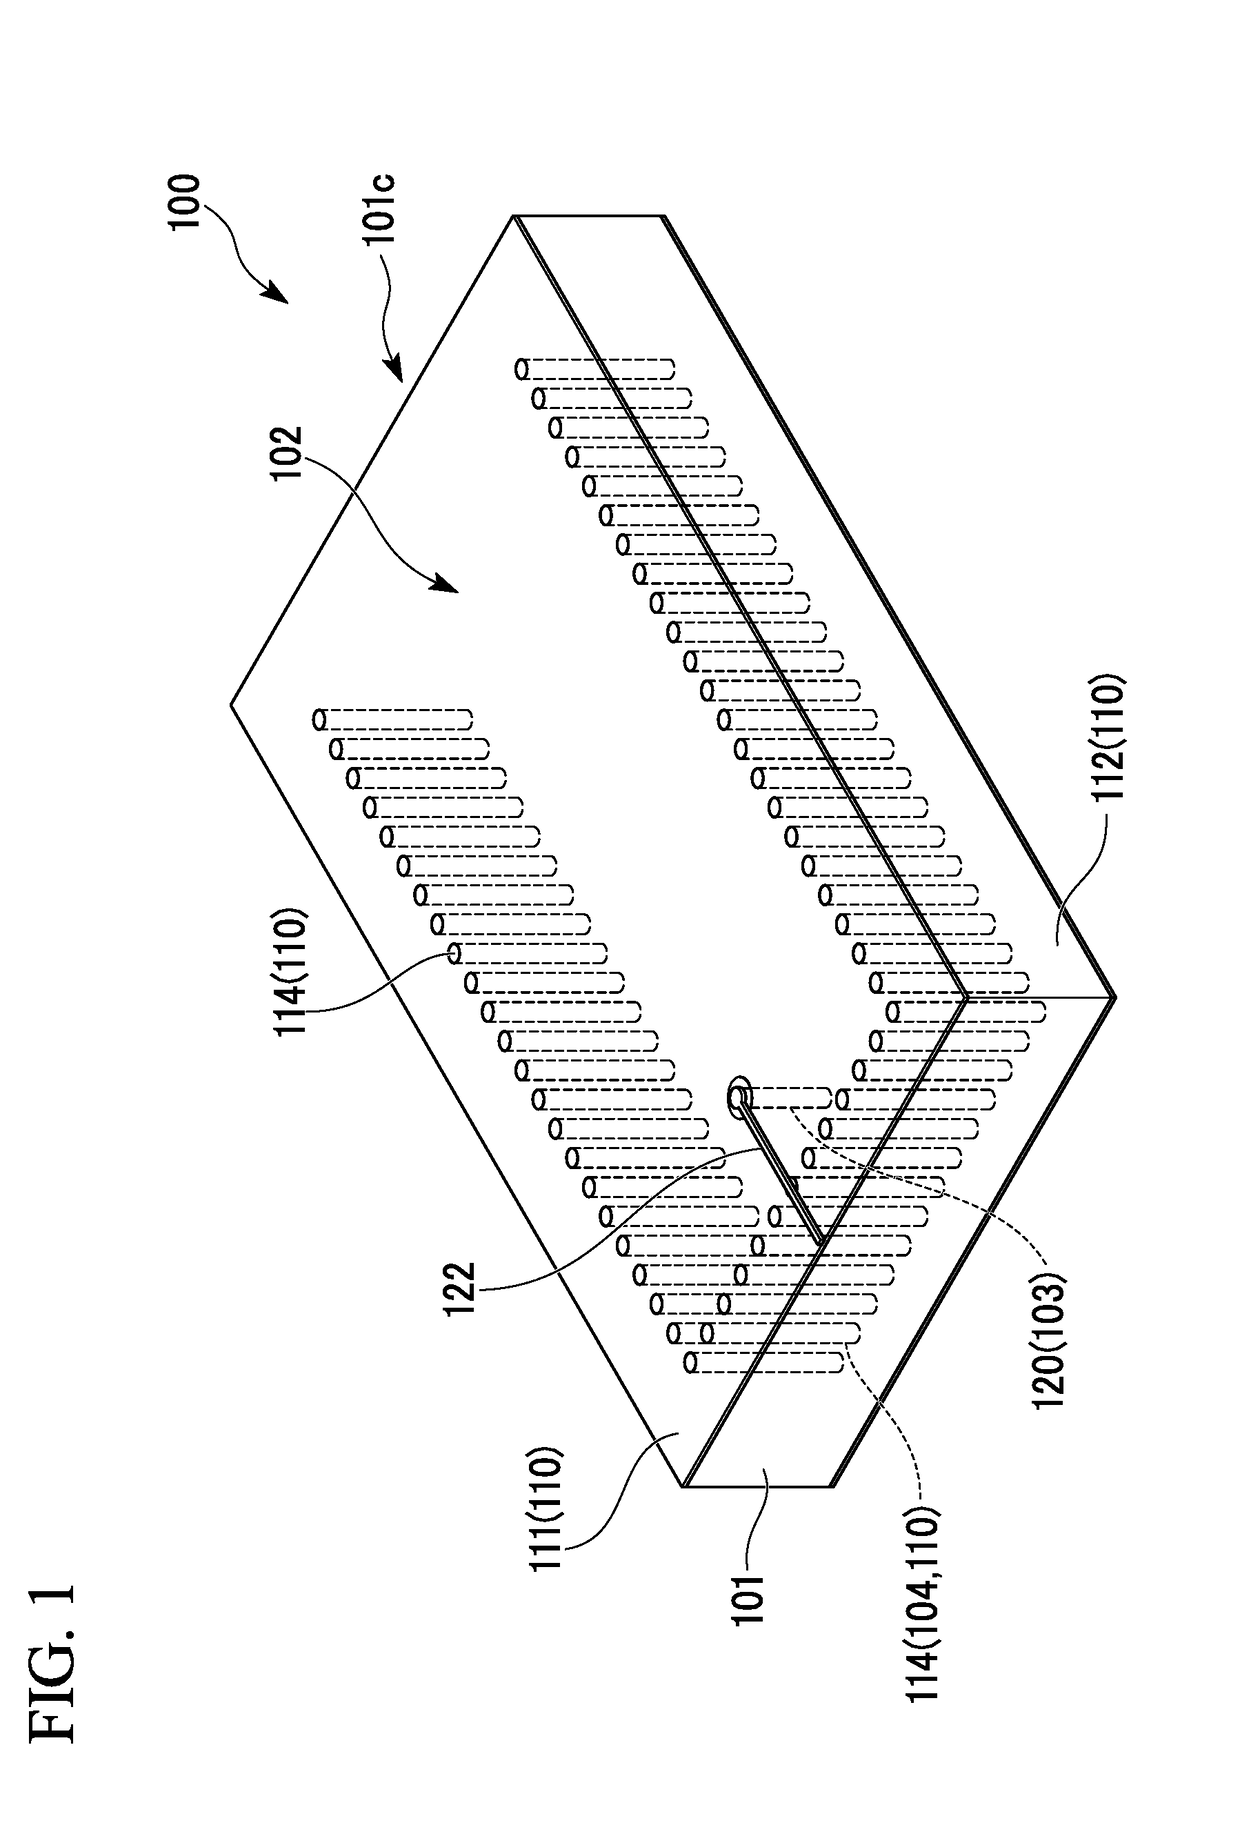 Mode converter between a plane circuit and a substrate waveguide including a pin having a land and an anti-pad